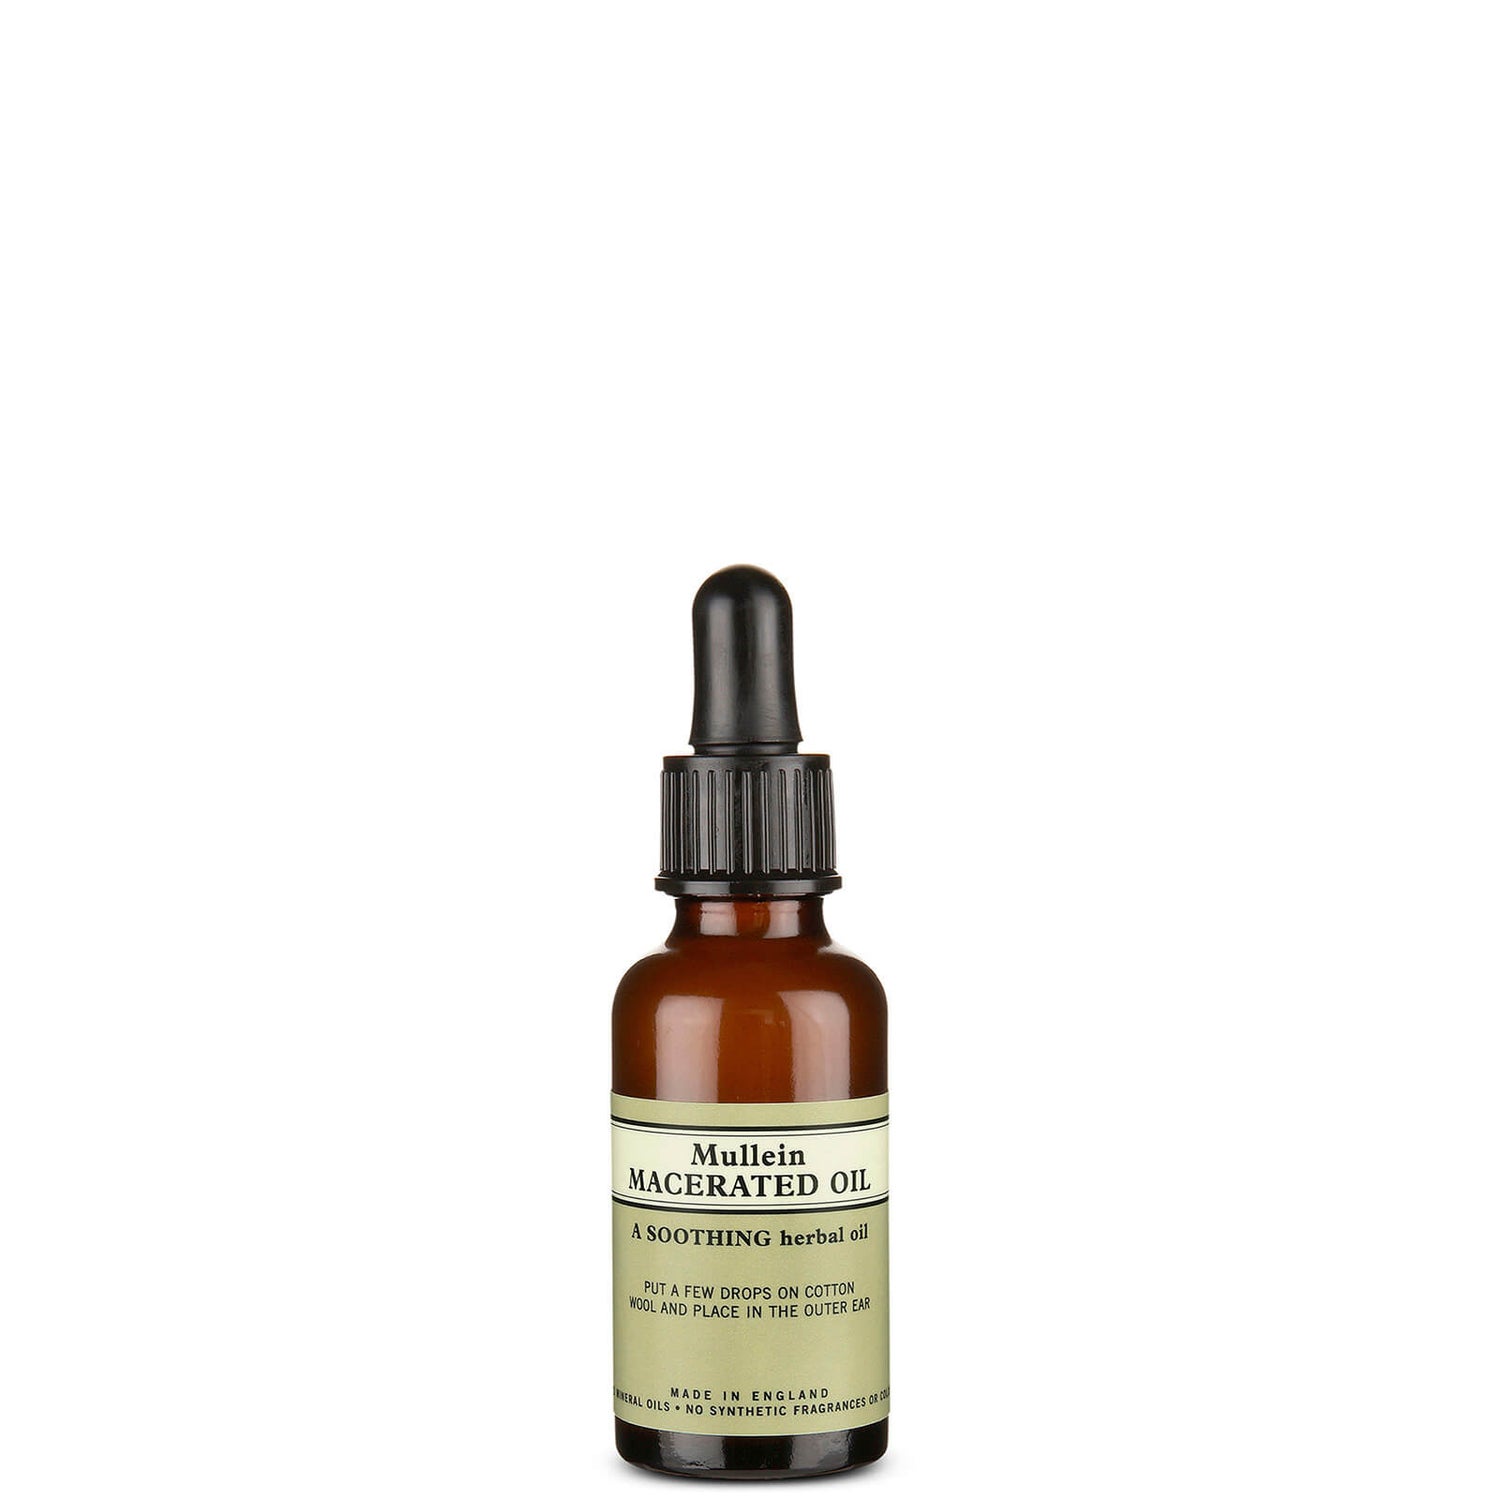 Mullein Macerated Oil 30ml